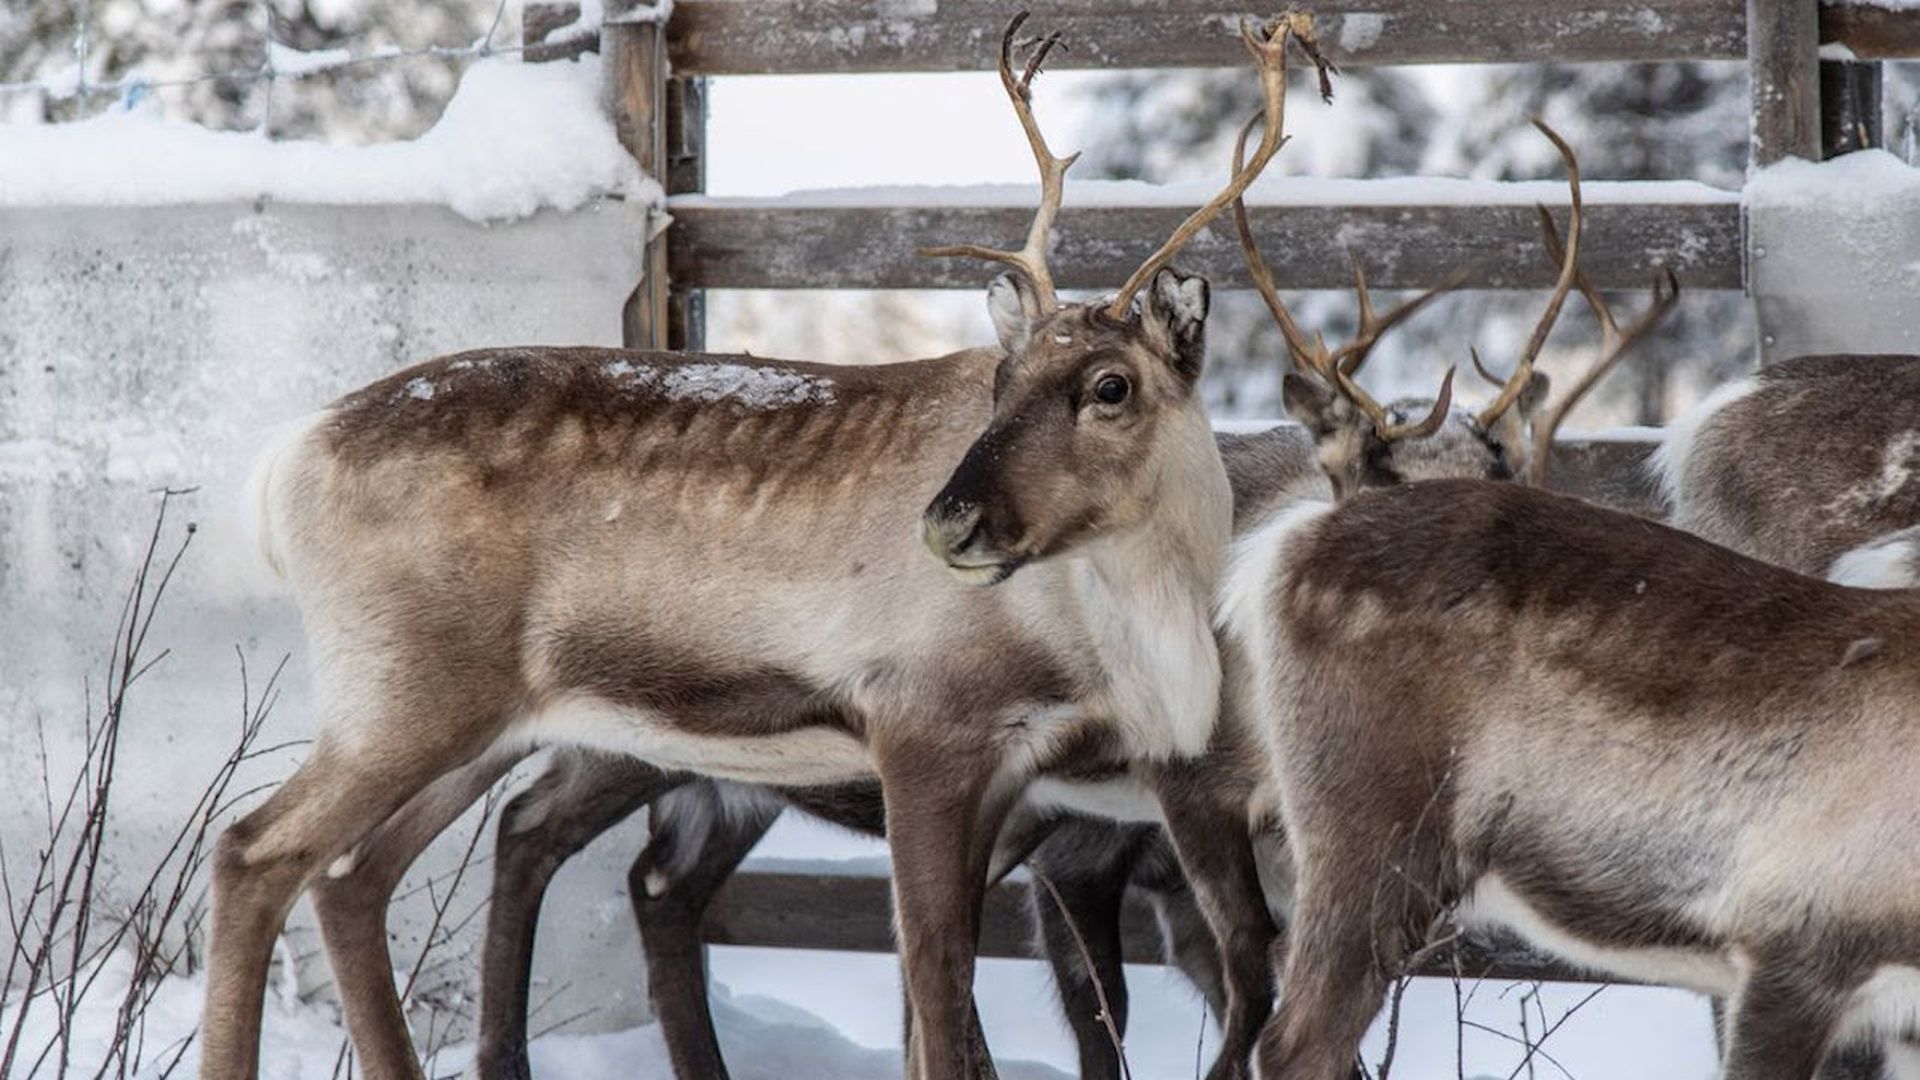 Reindeer in a Swedish corral wait to be released onto winter pastures